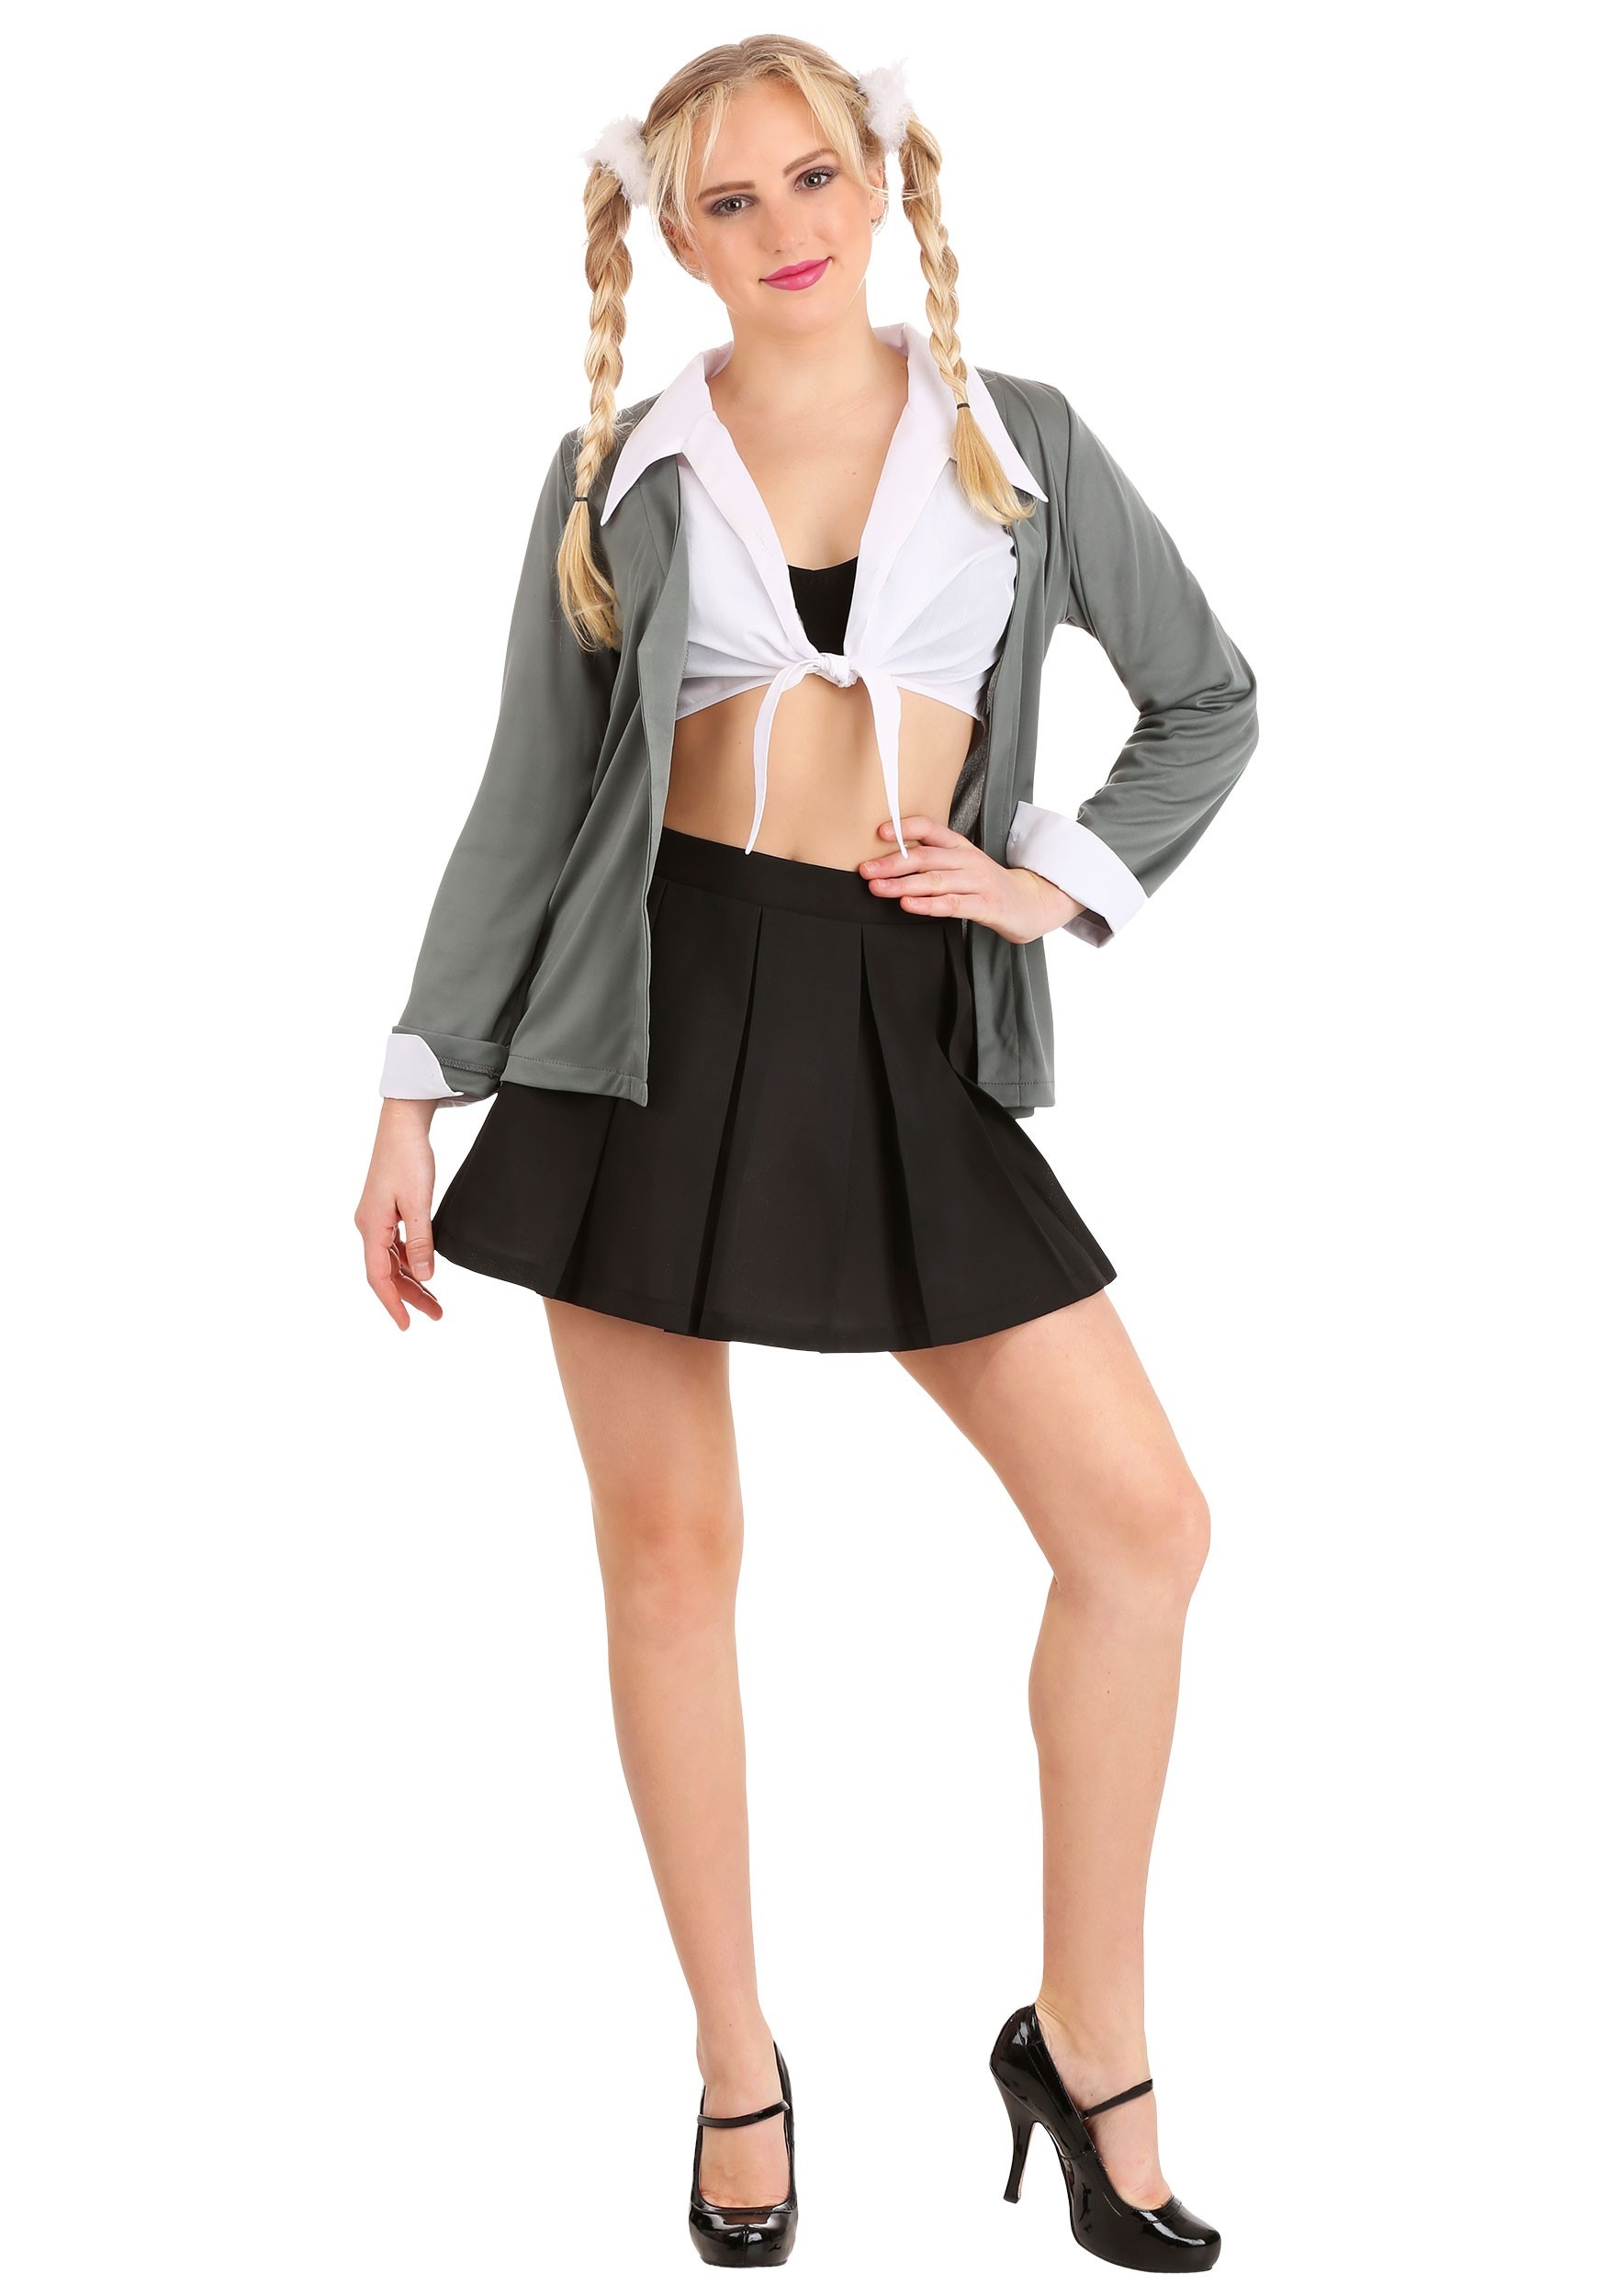 One More Time Pop Singer Womens Costume